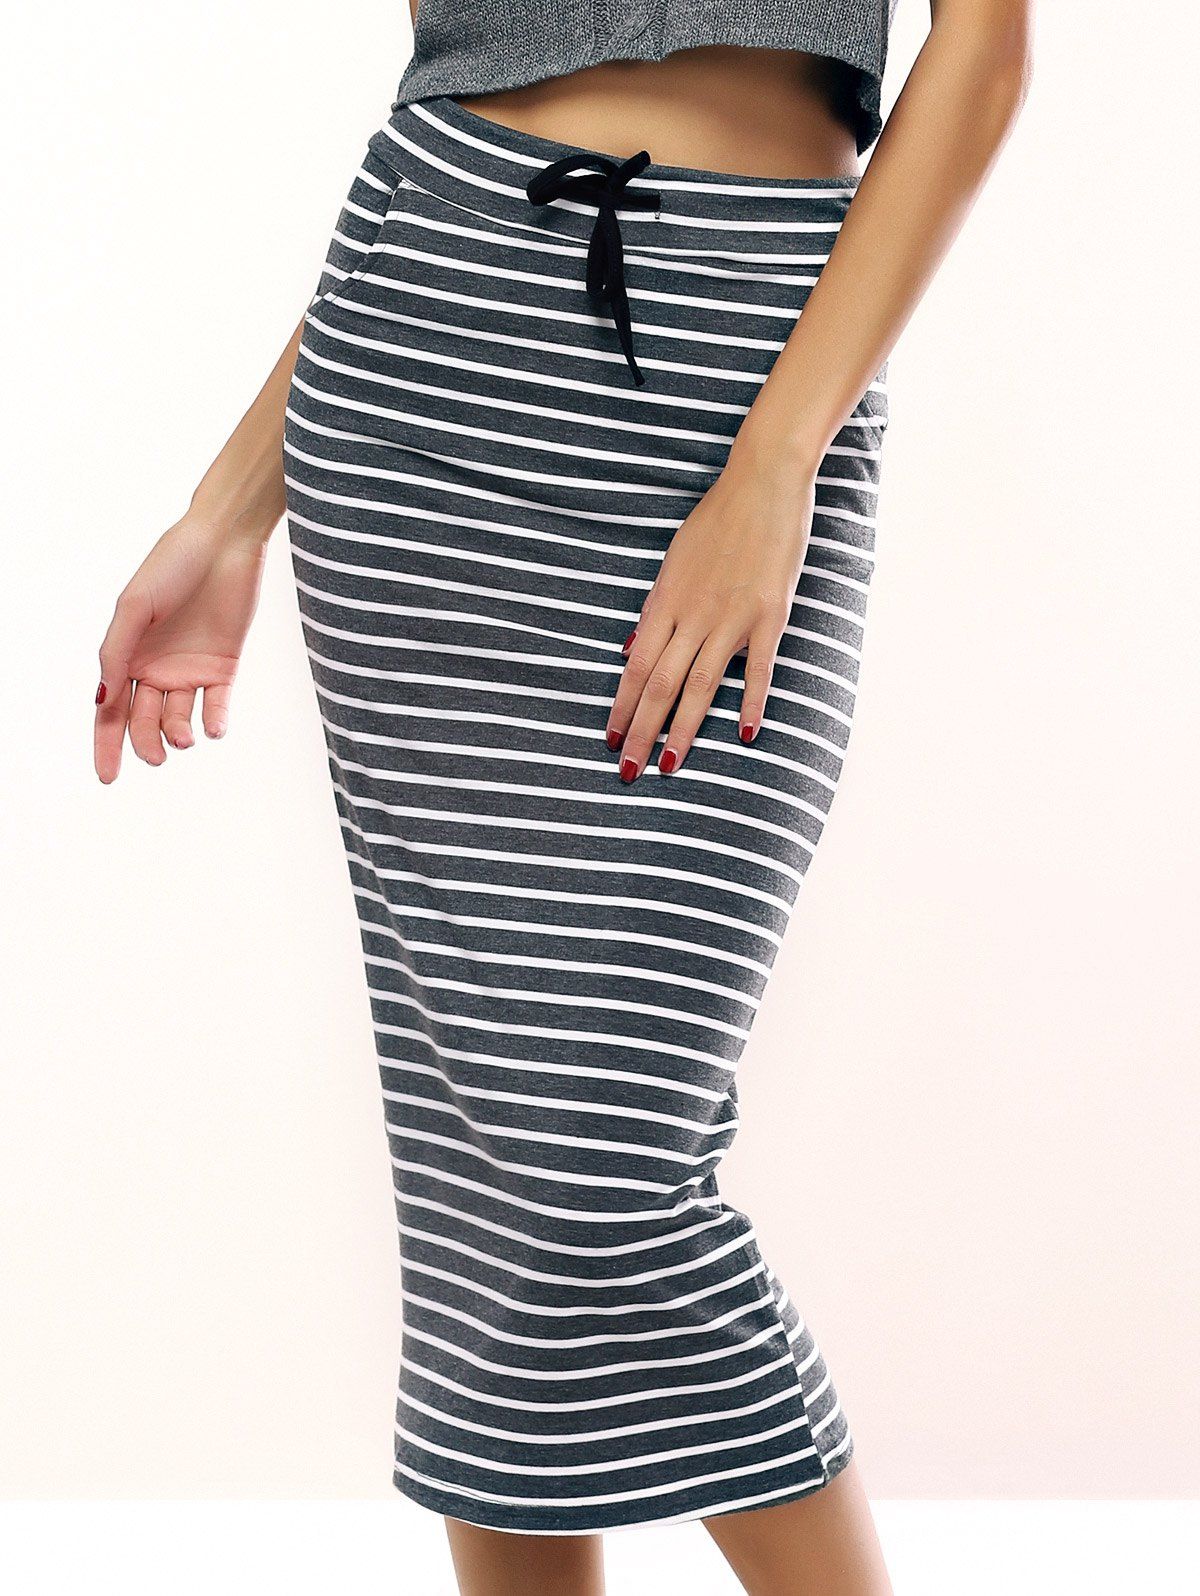 Brief Drawstring Striped Skirt For Women - GREY/WHITE ONE SIZE